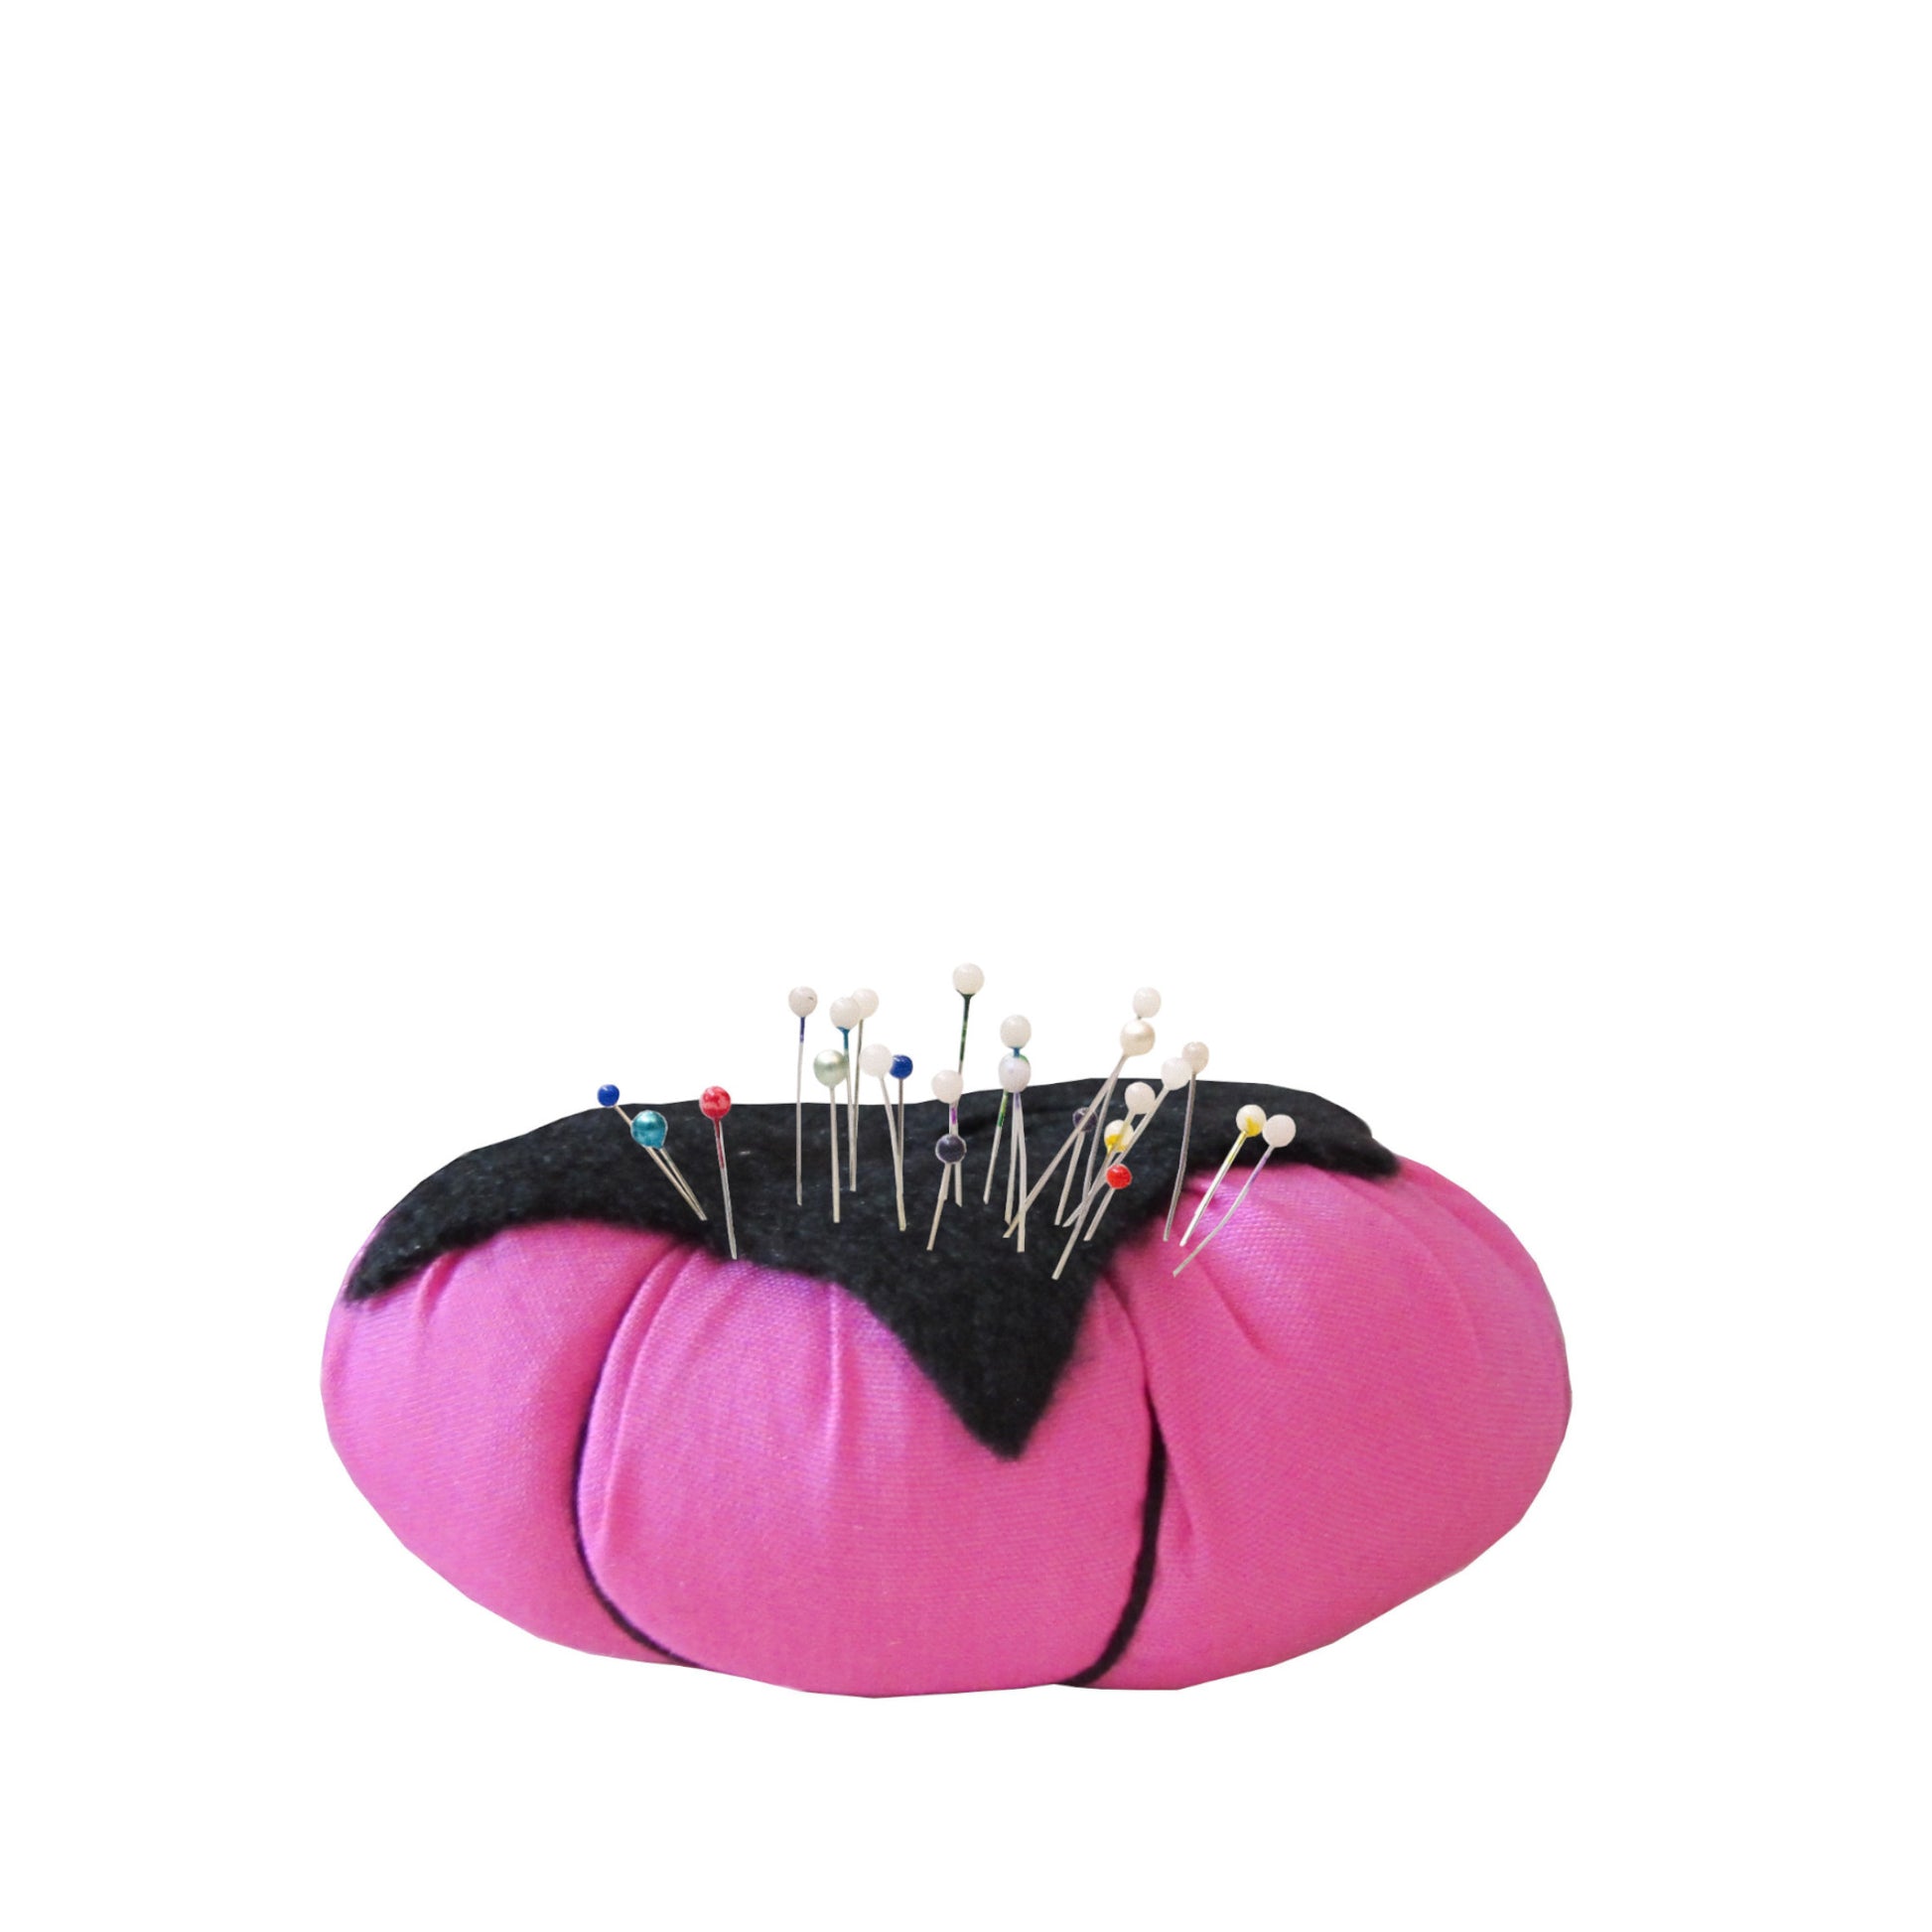 Black Top Hot Pink Tomato Pincushion with pins